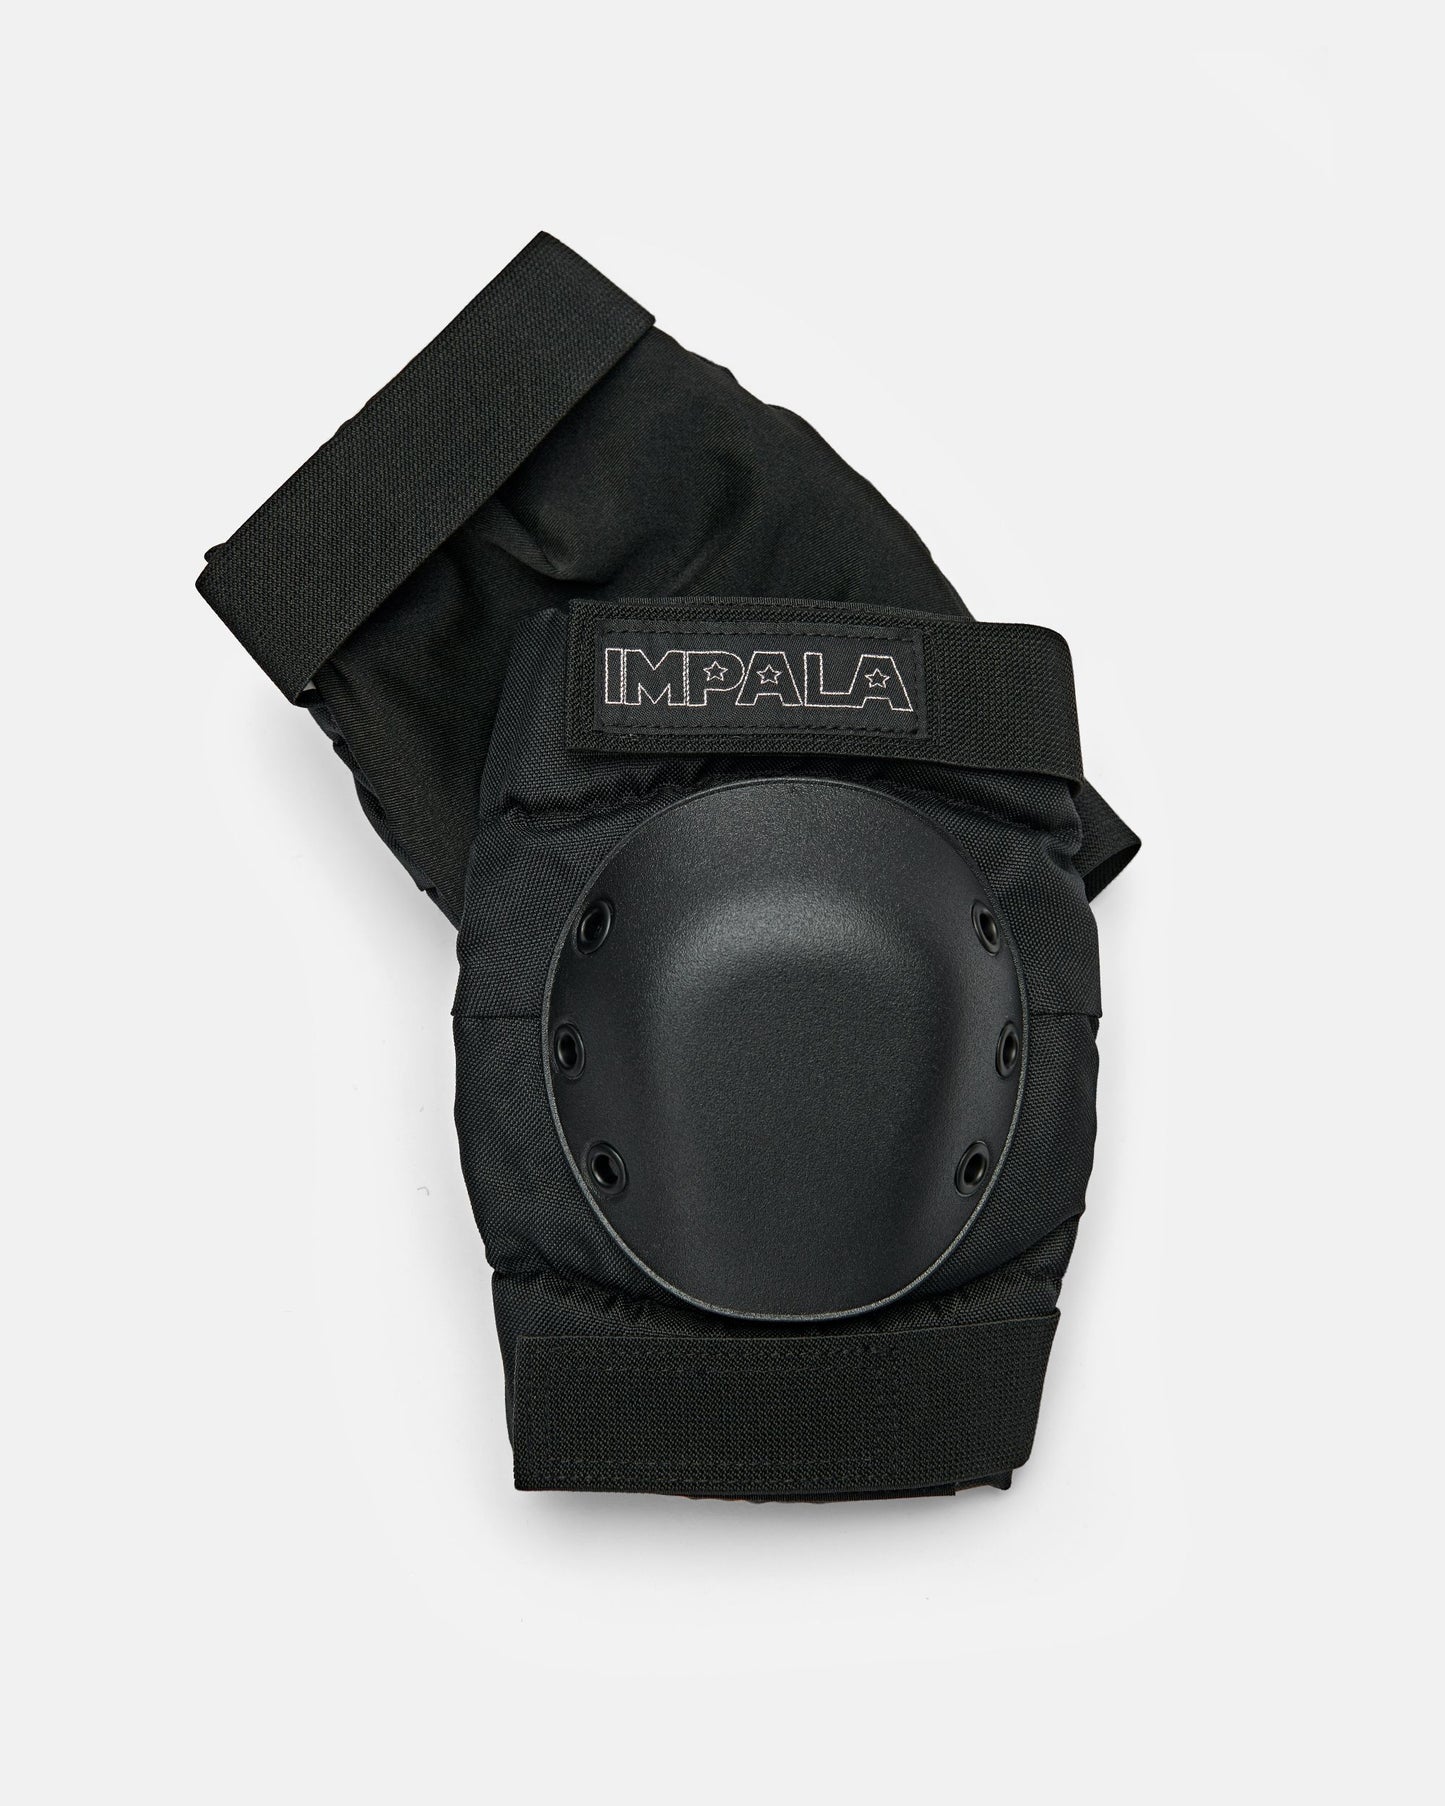 Knee pads in the Impala Protective Set - Black